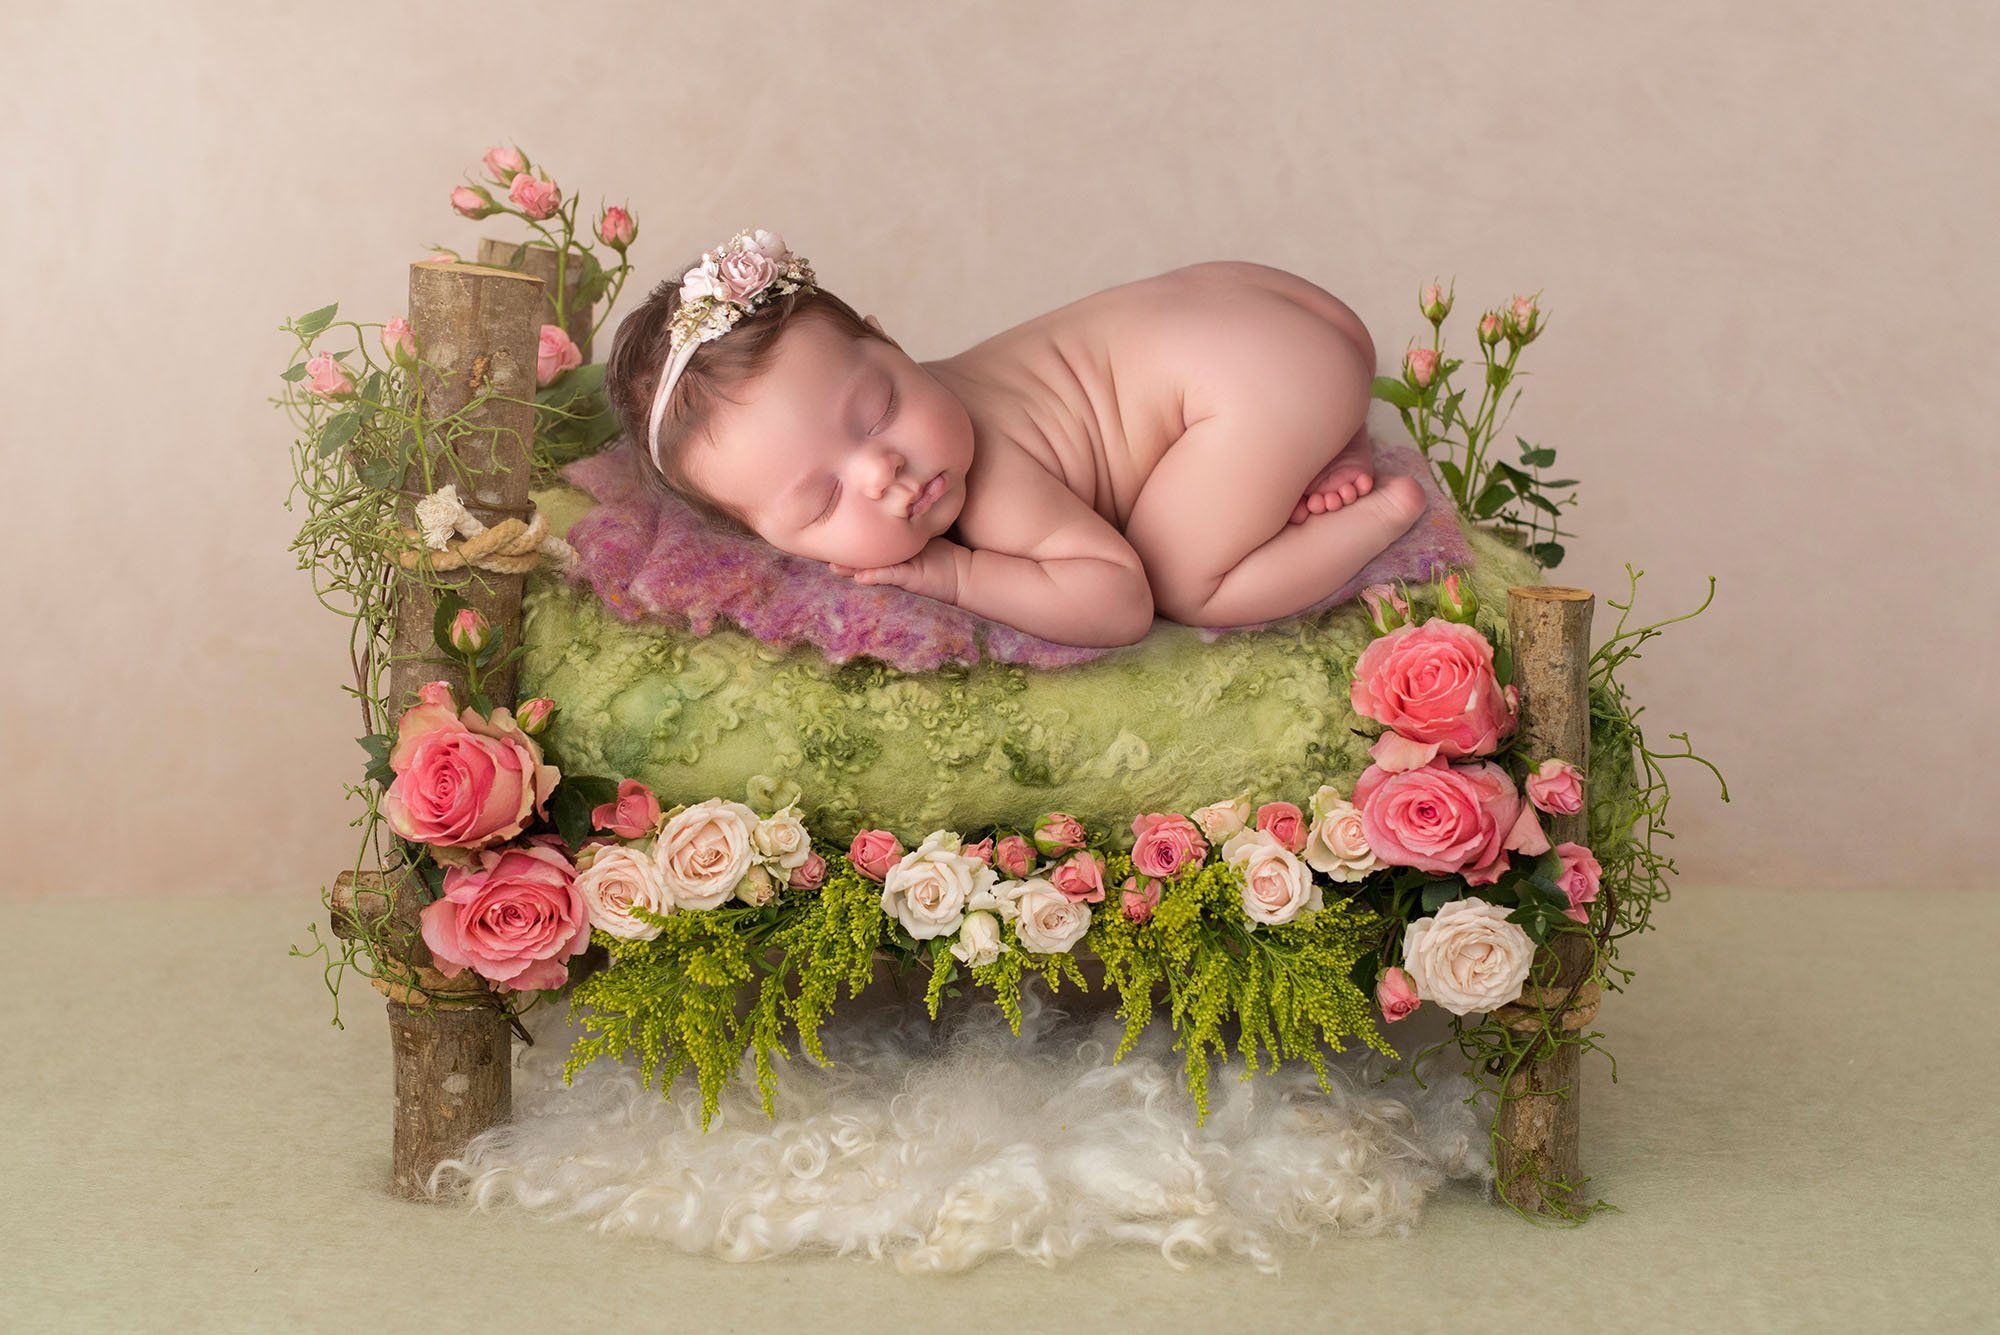 sleeping newborn girl on a rustic wooden bed with roses best time to take newborn photos